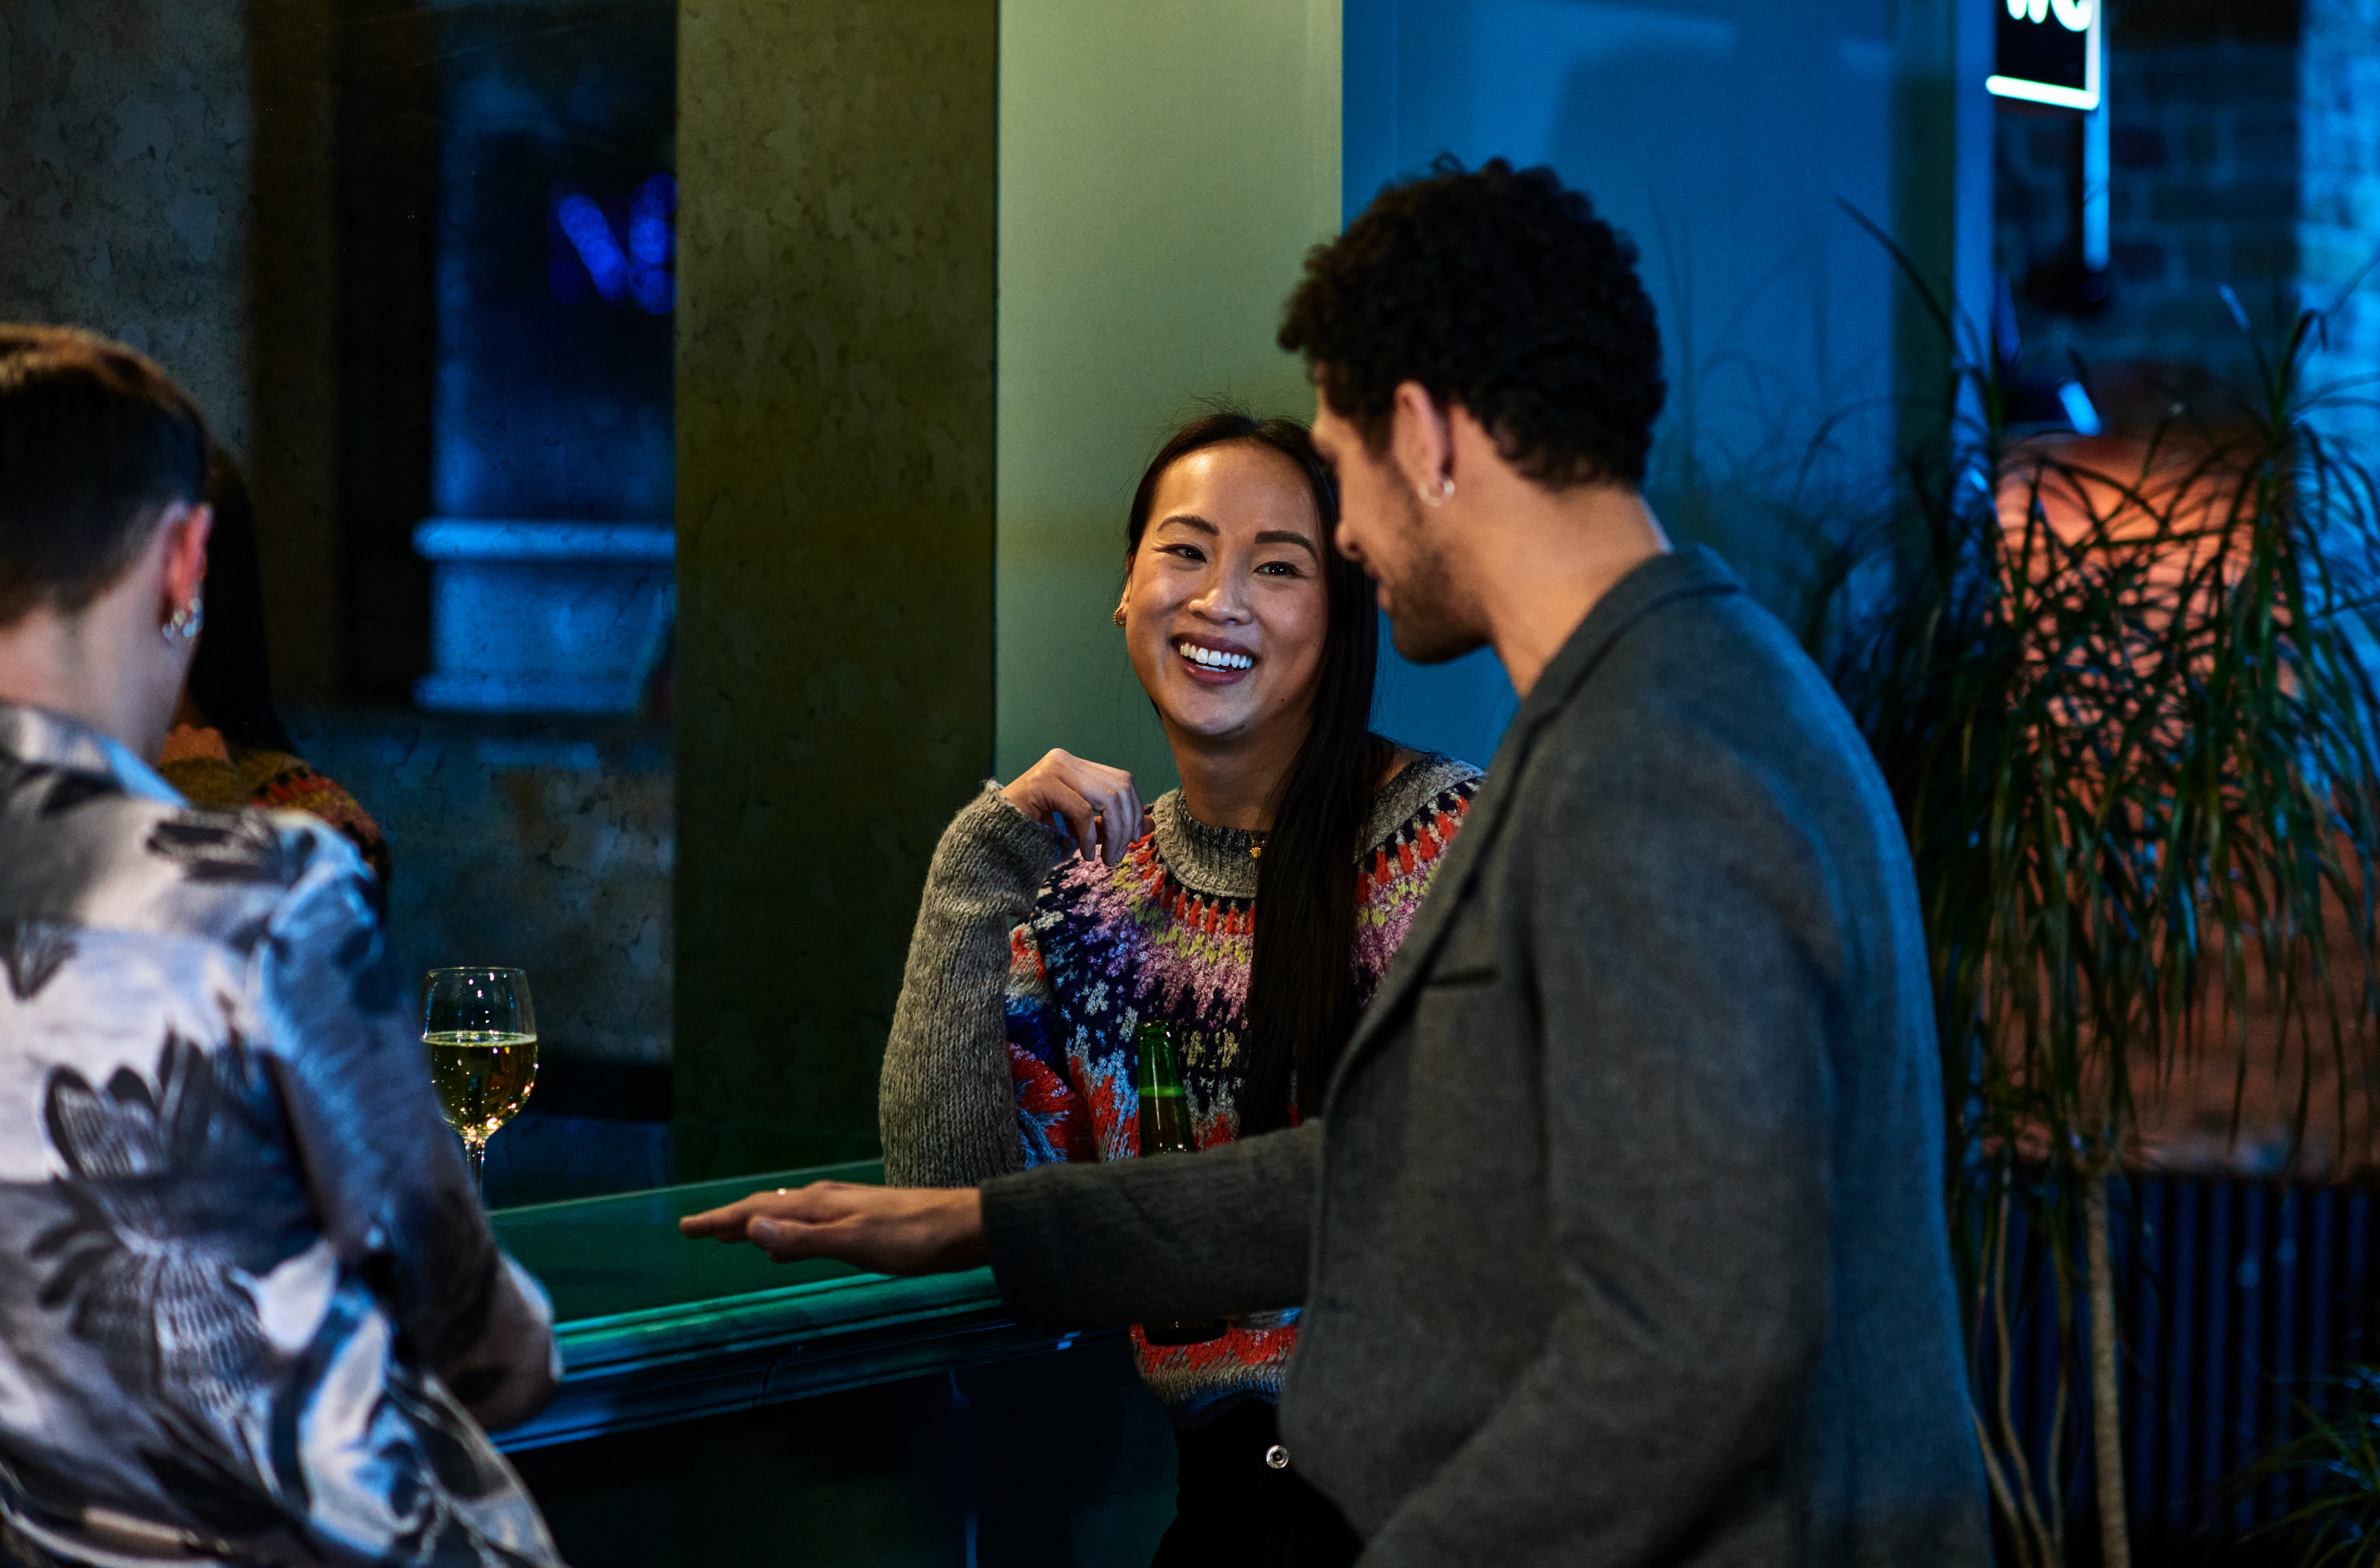 Two people are engaged in a conversation with smiles, in a social setting with a bar in the background